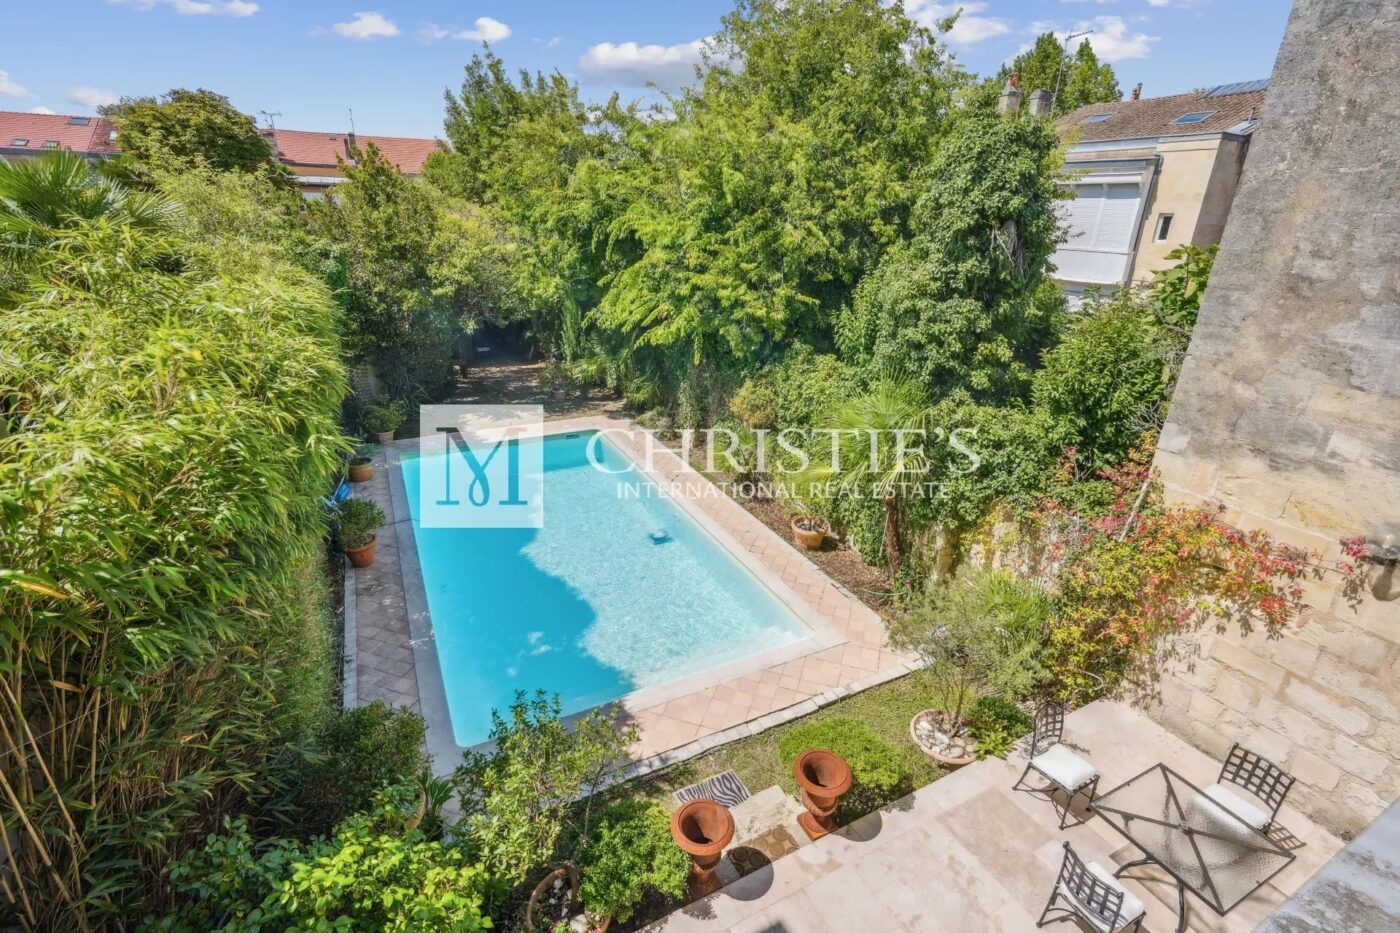 BORDEAUX - 4 bedroom house with garden / swimming pool and parking (for 2 cars)